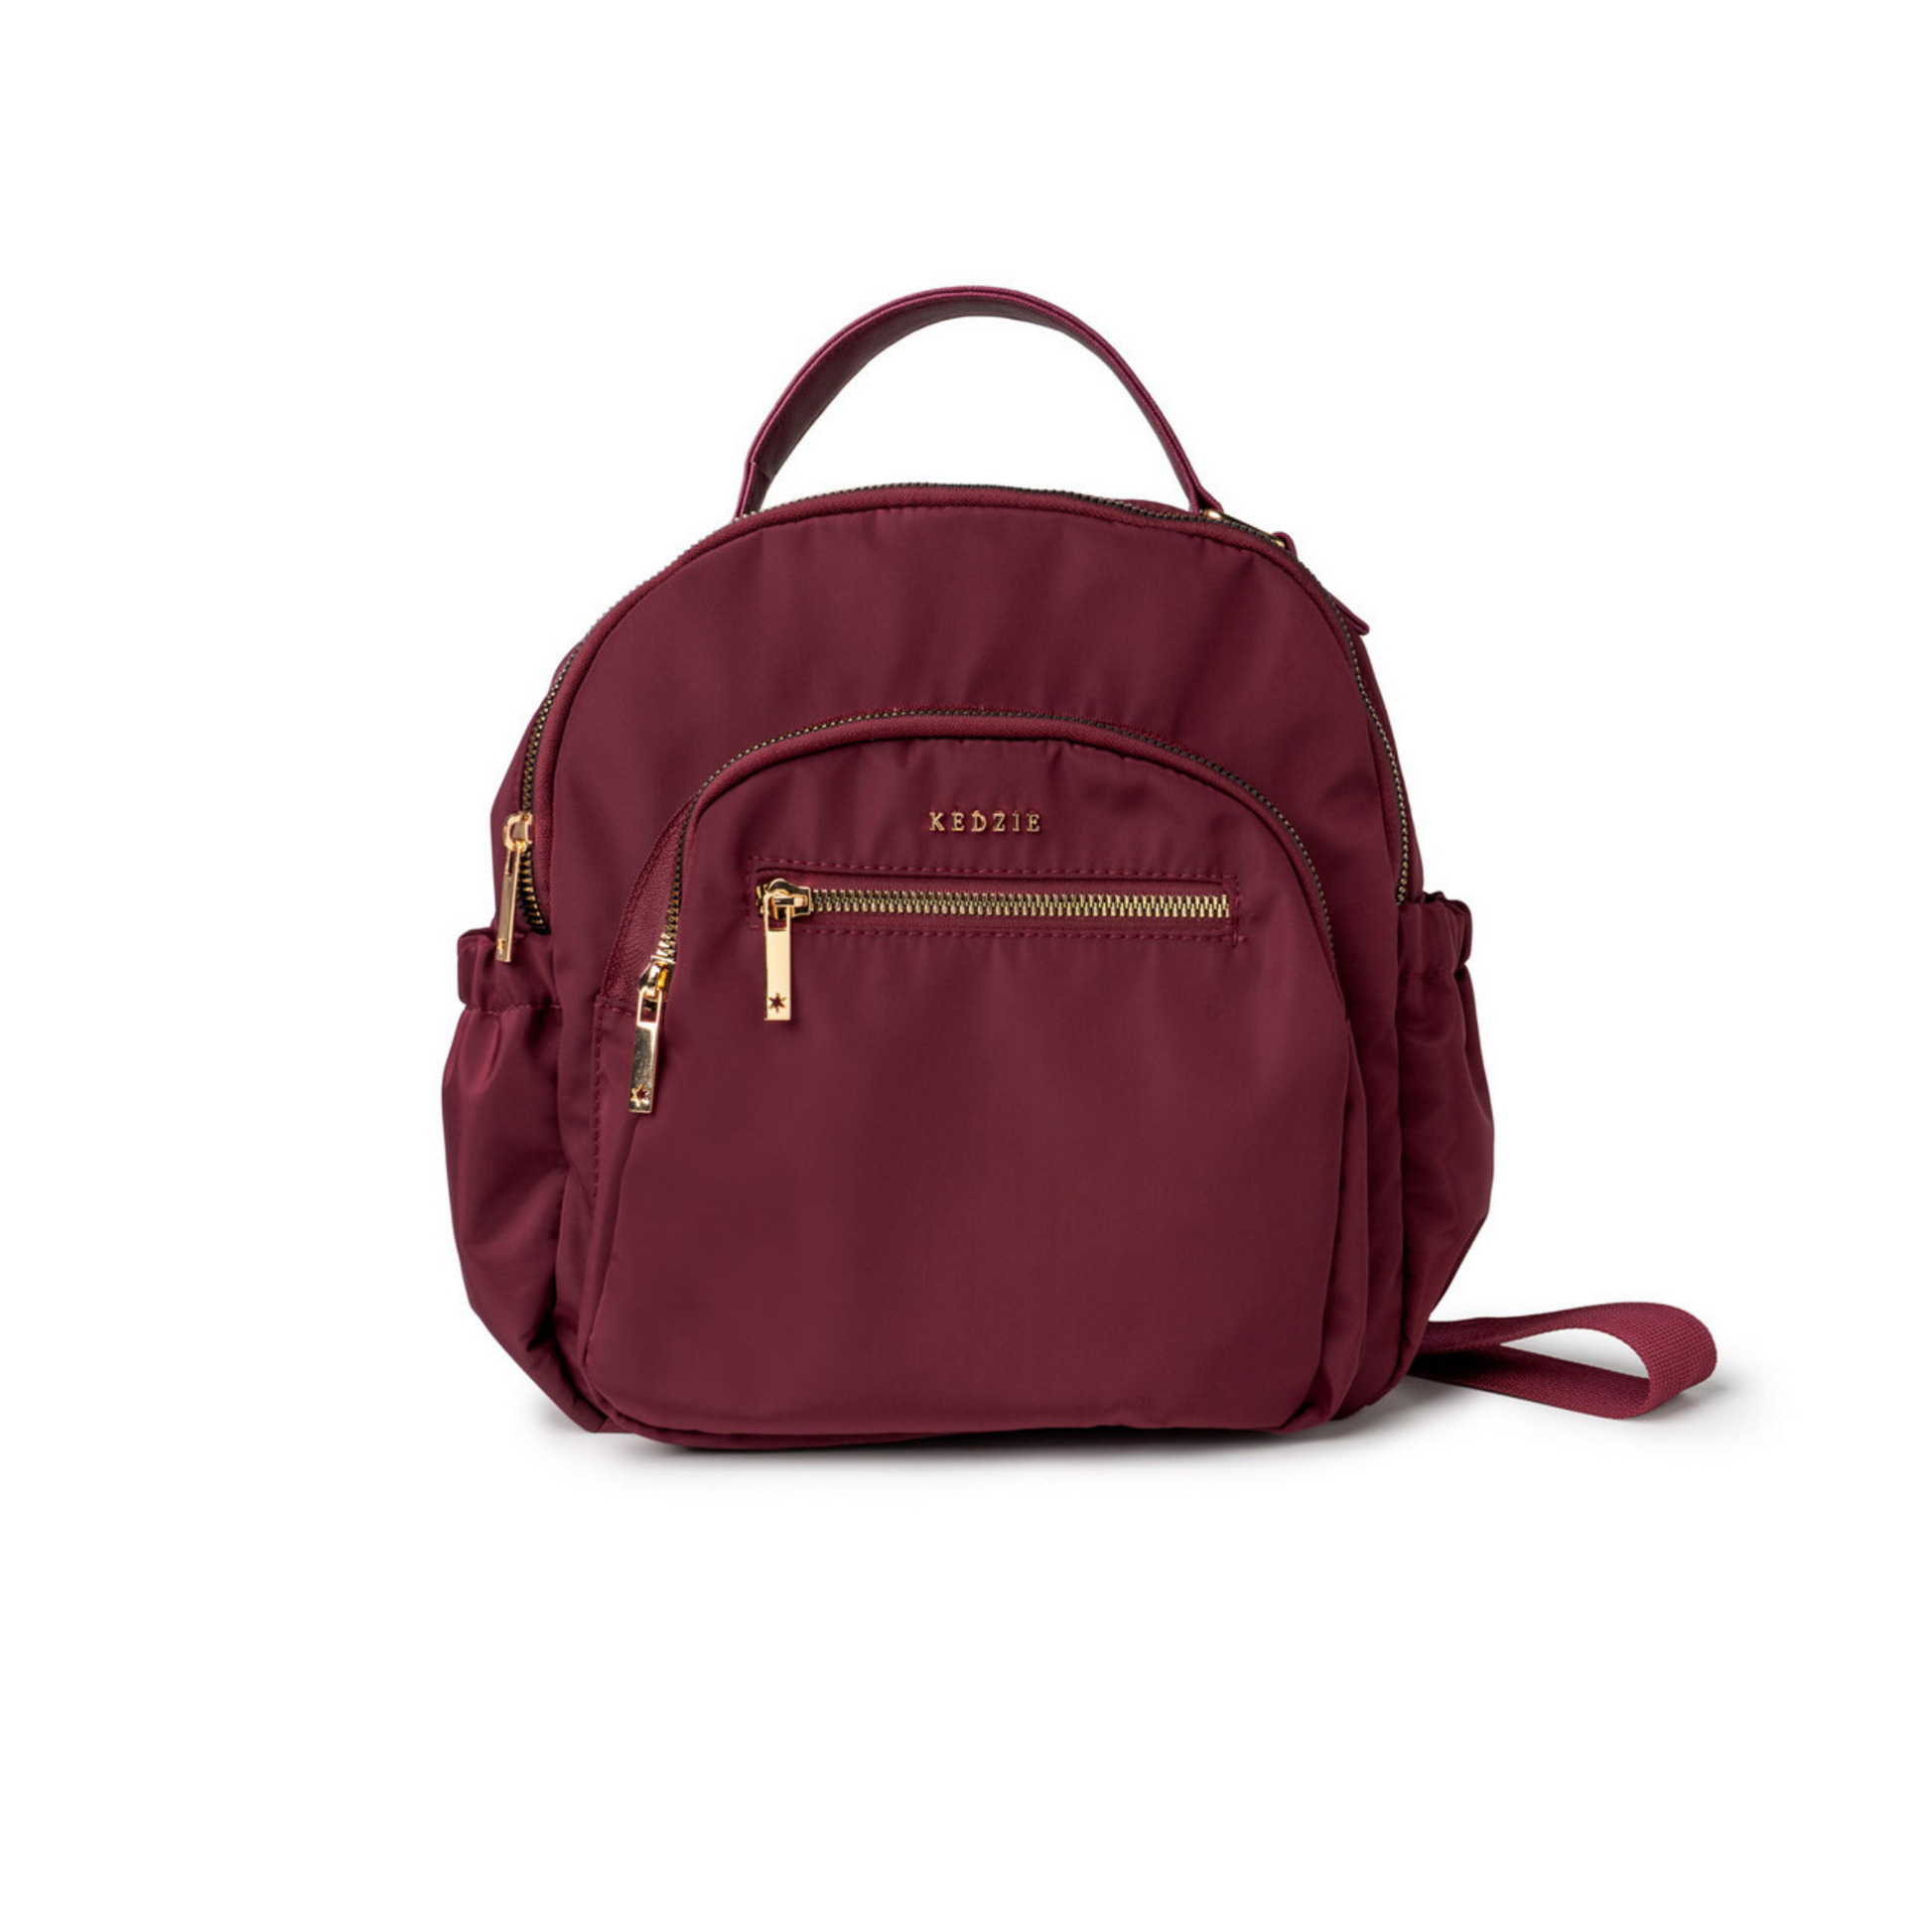 Aire convertible Backpack in Burgundy